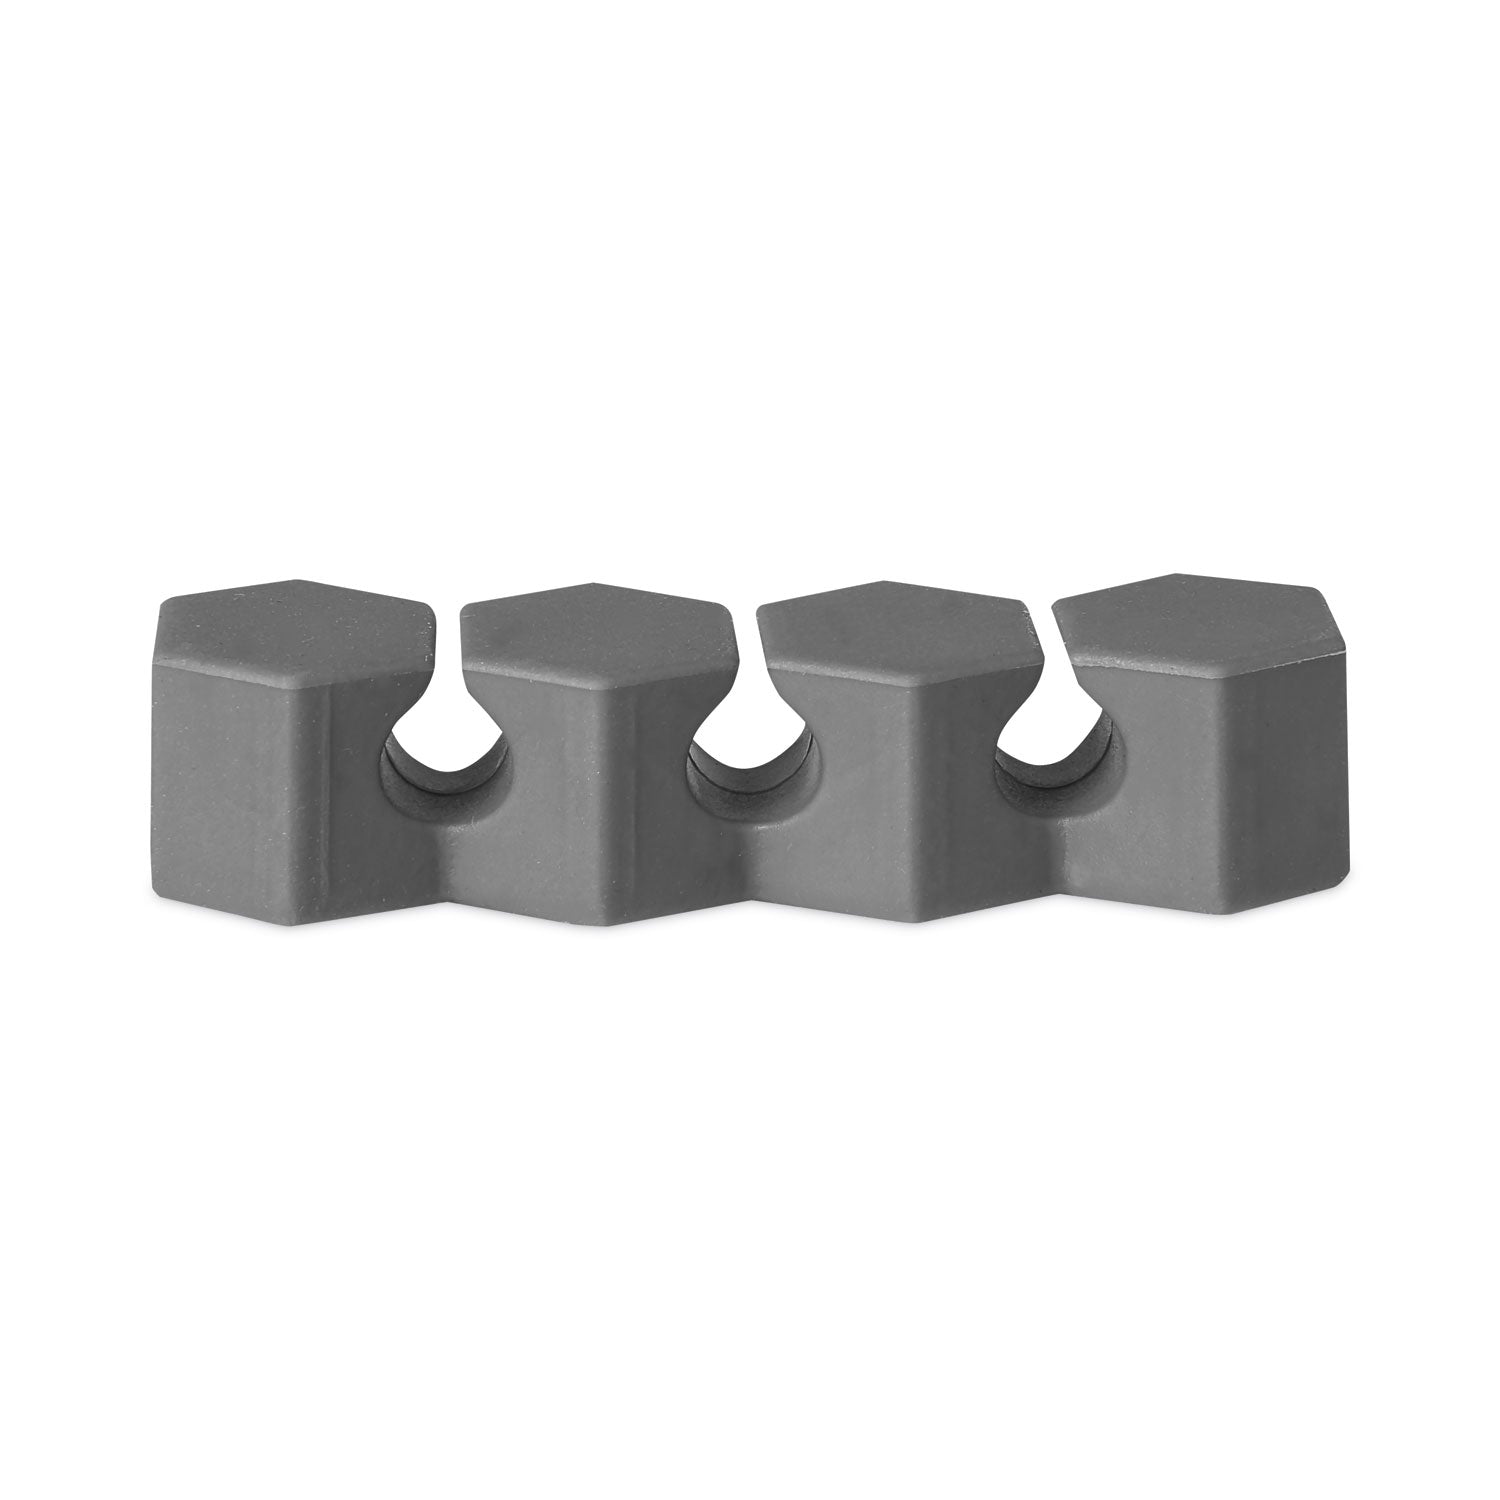 three-channel-cable-holder-2-x-2-gray-4-pack_voxrccm3gyv - 2